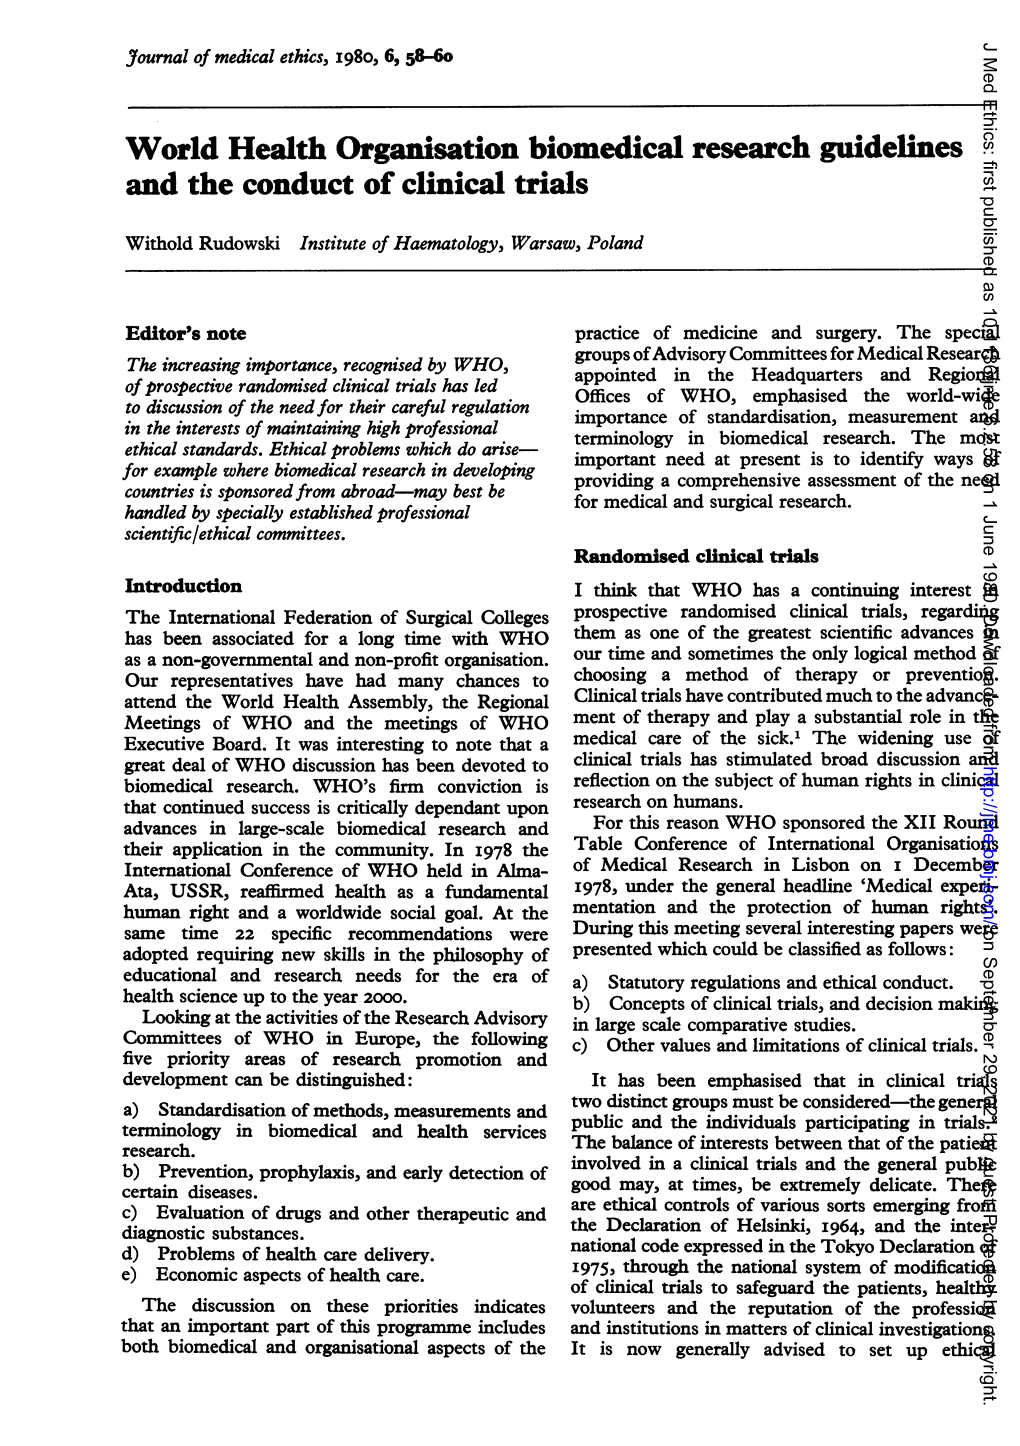 World Health Organisation Biomedical Research Guidelines and the Conduct of Clinical Trials